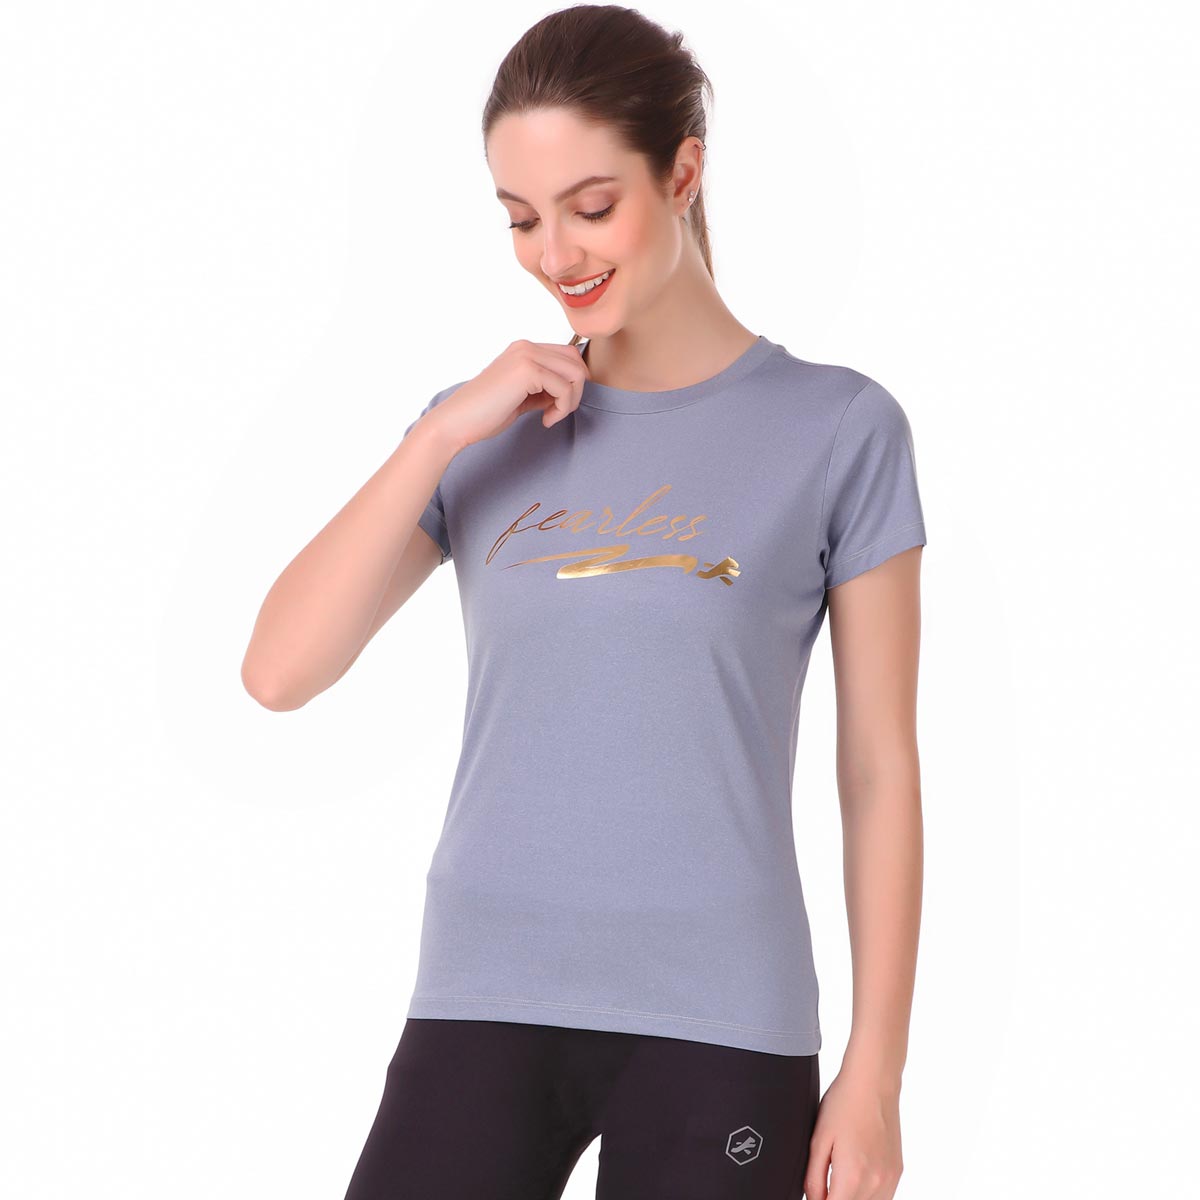 Performance Tshirt For Fearless Women (Stone Blue)